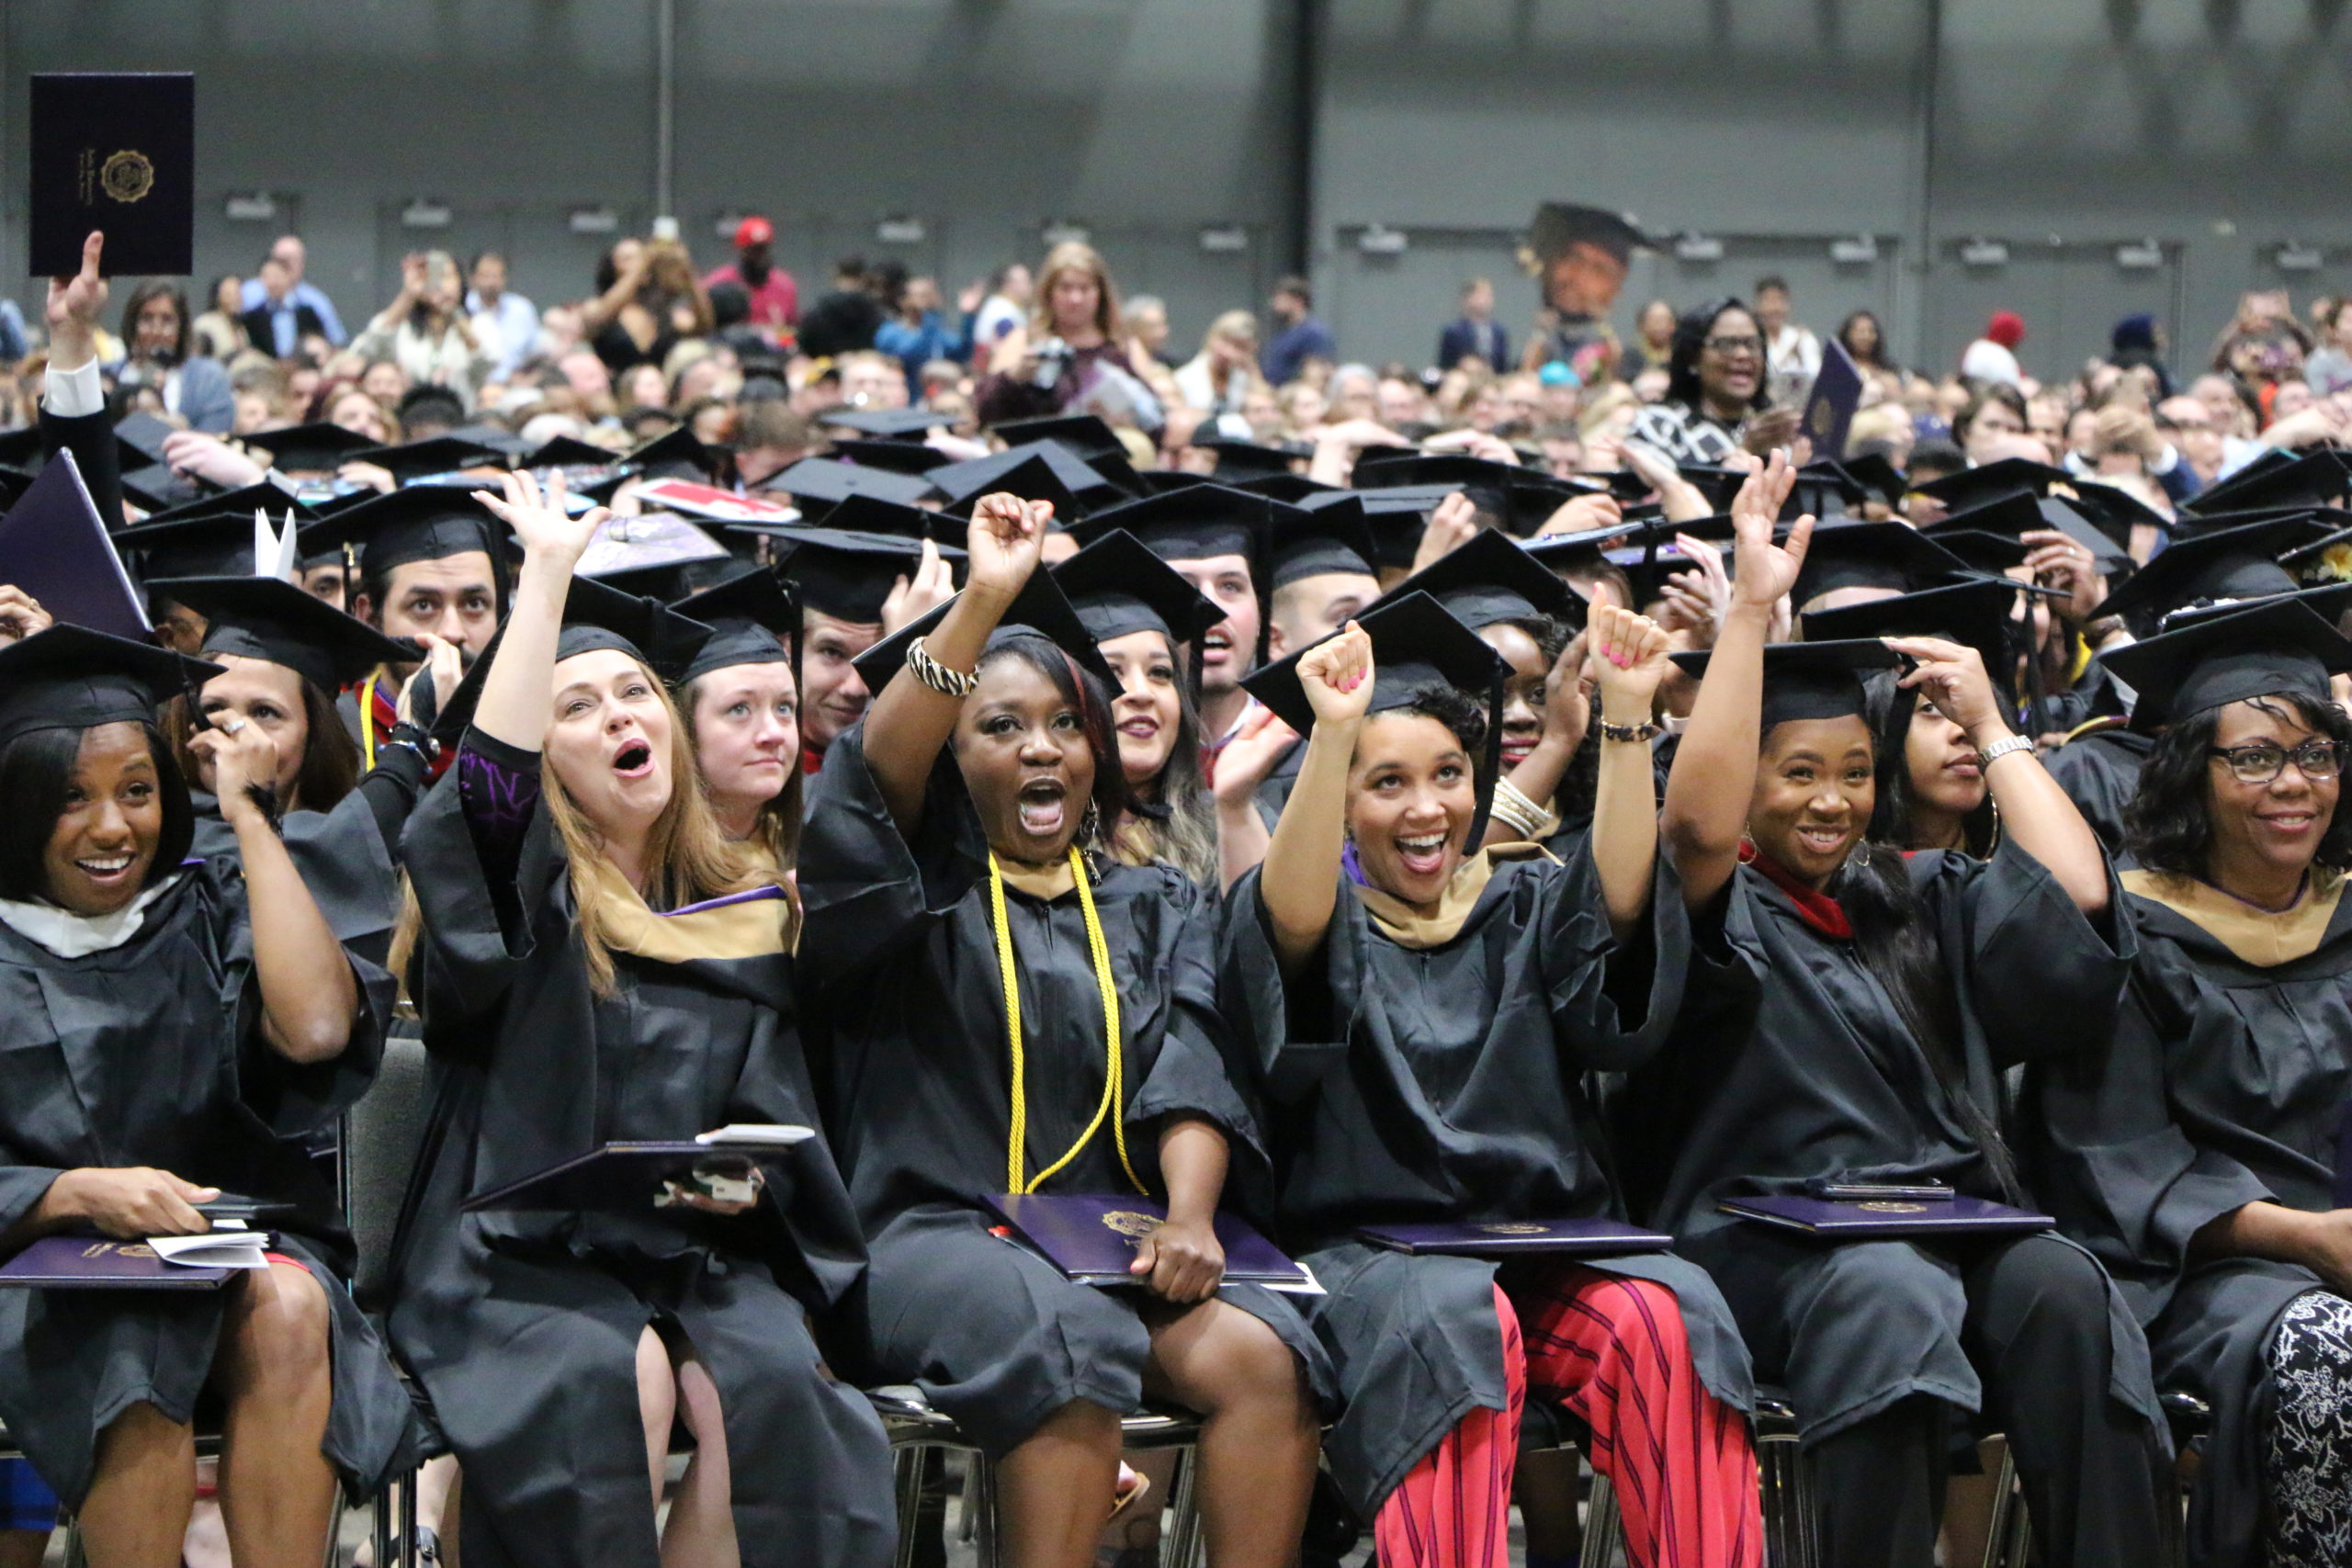 Several Avila students sitting at graduation cheering and raising their arms in the air.